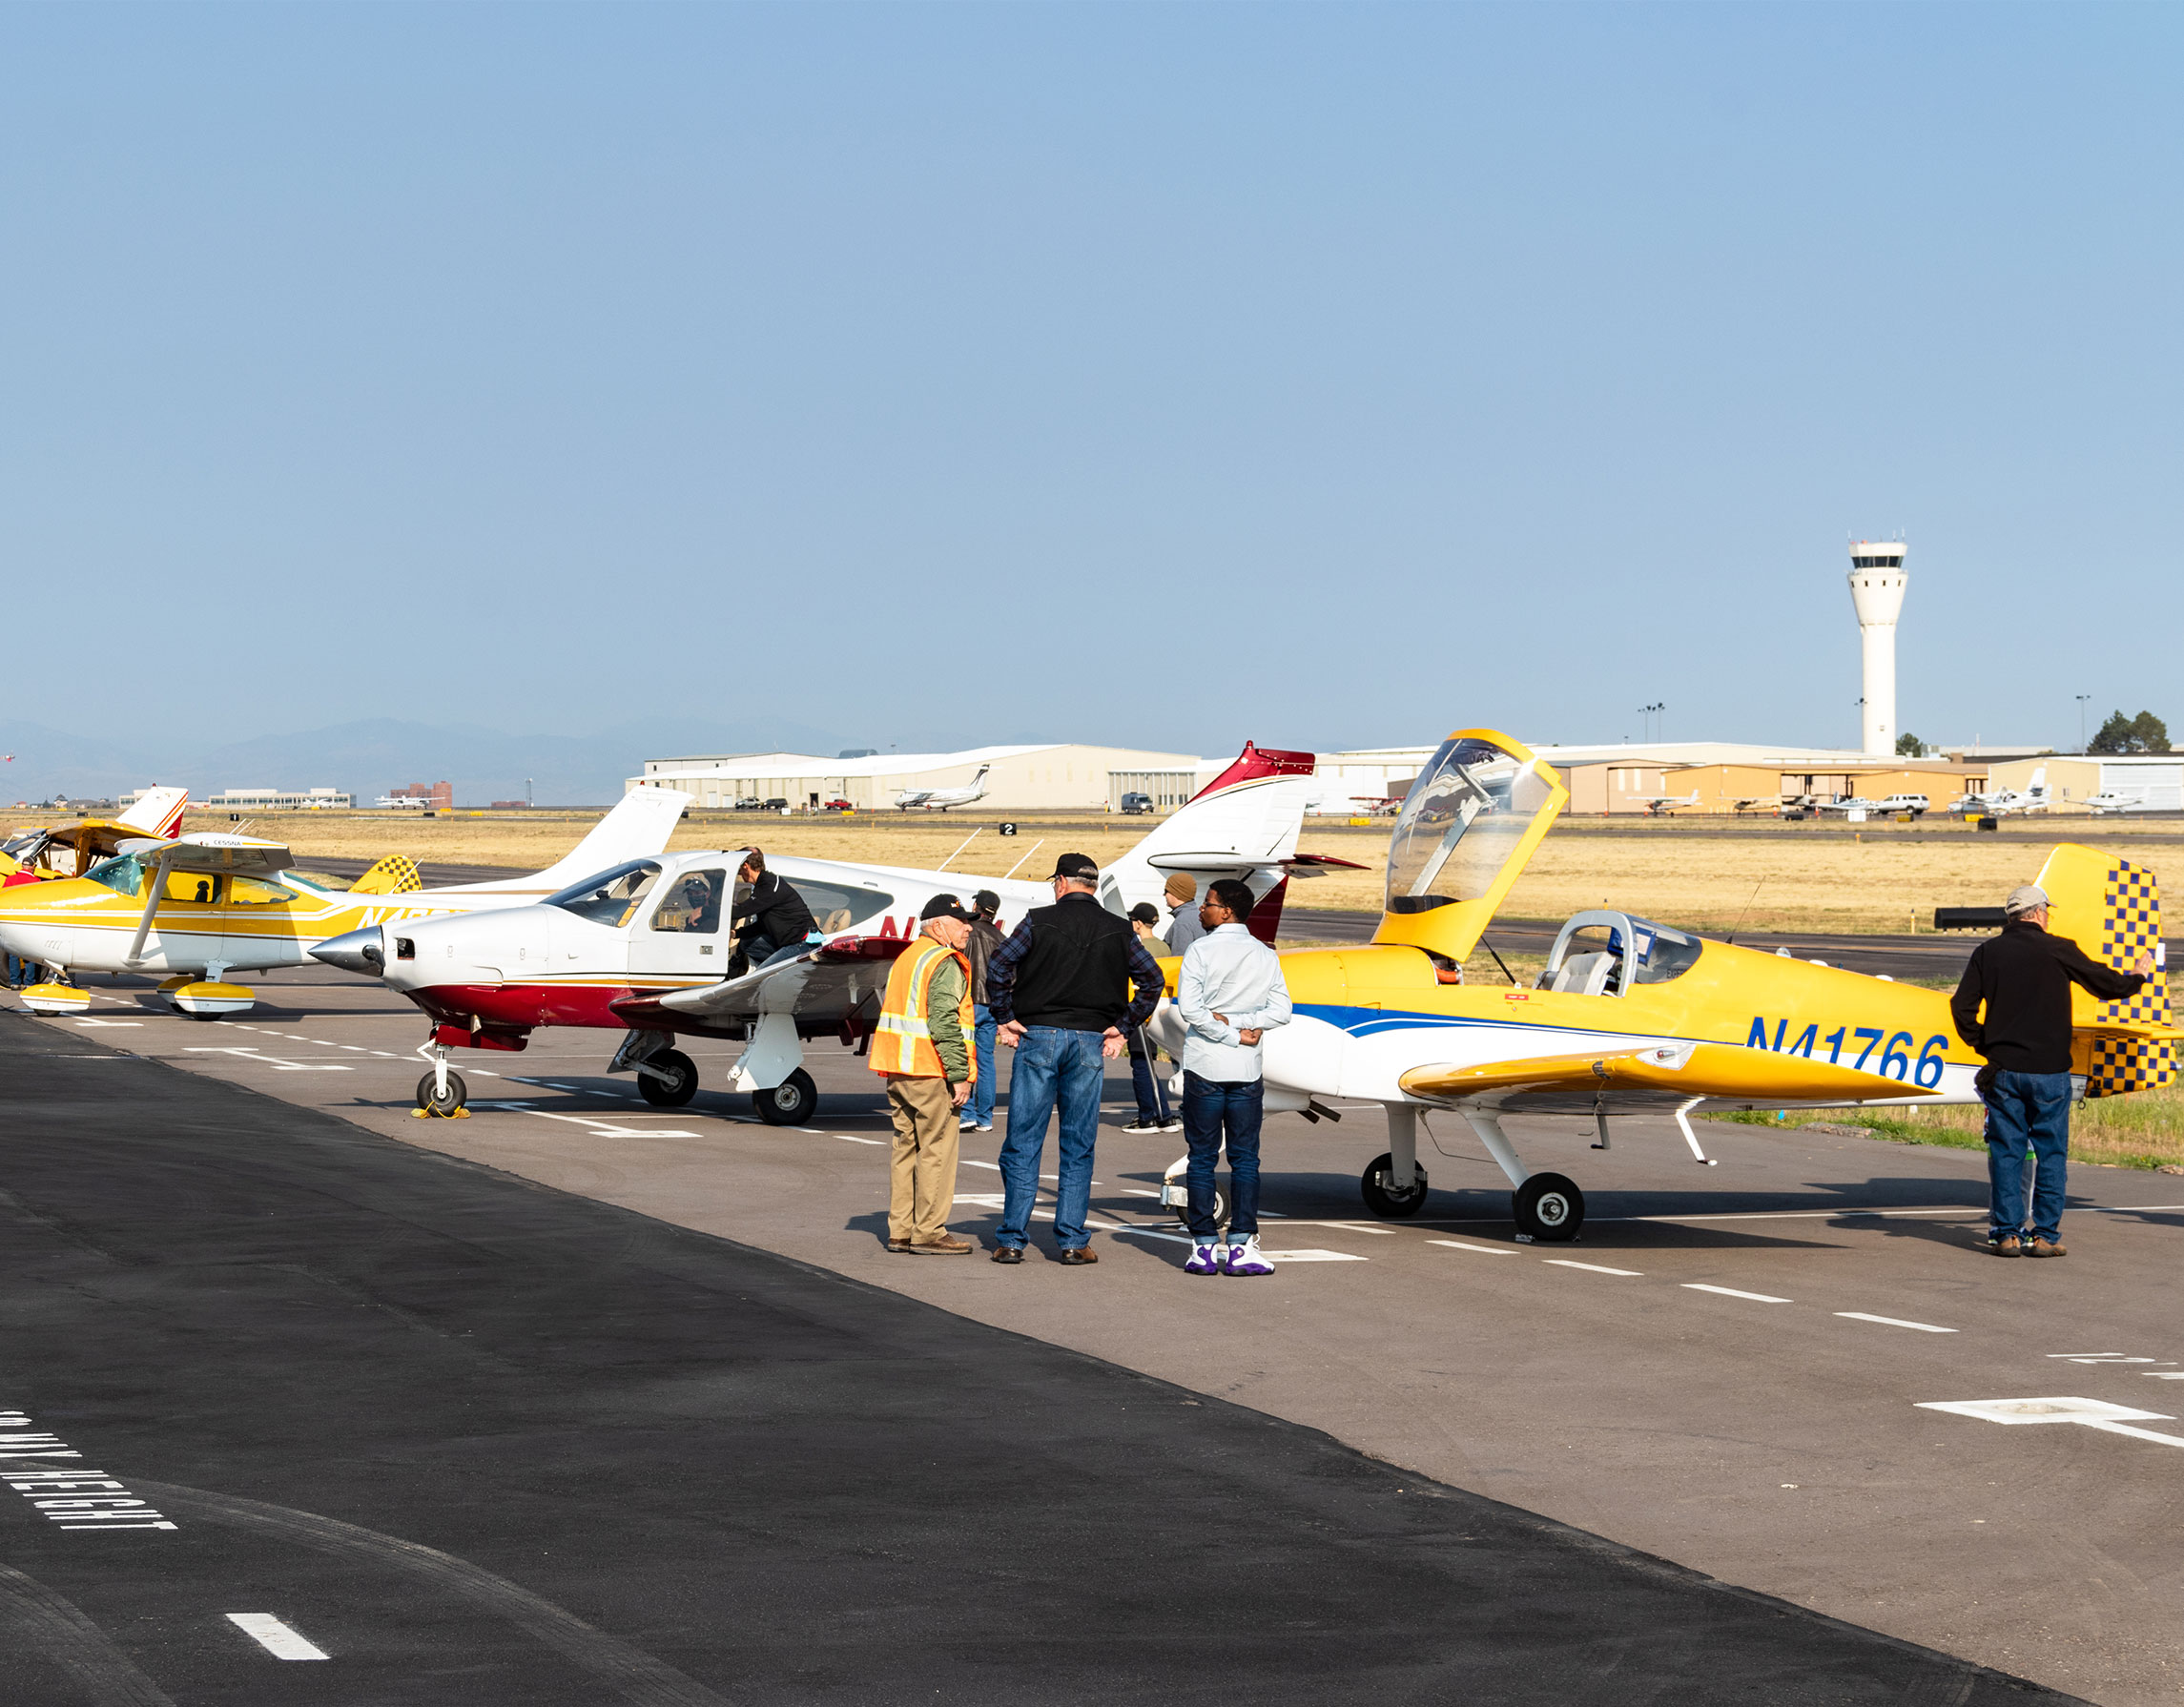 People viewing aircraft on the ramp